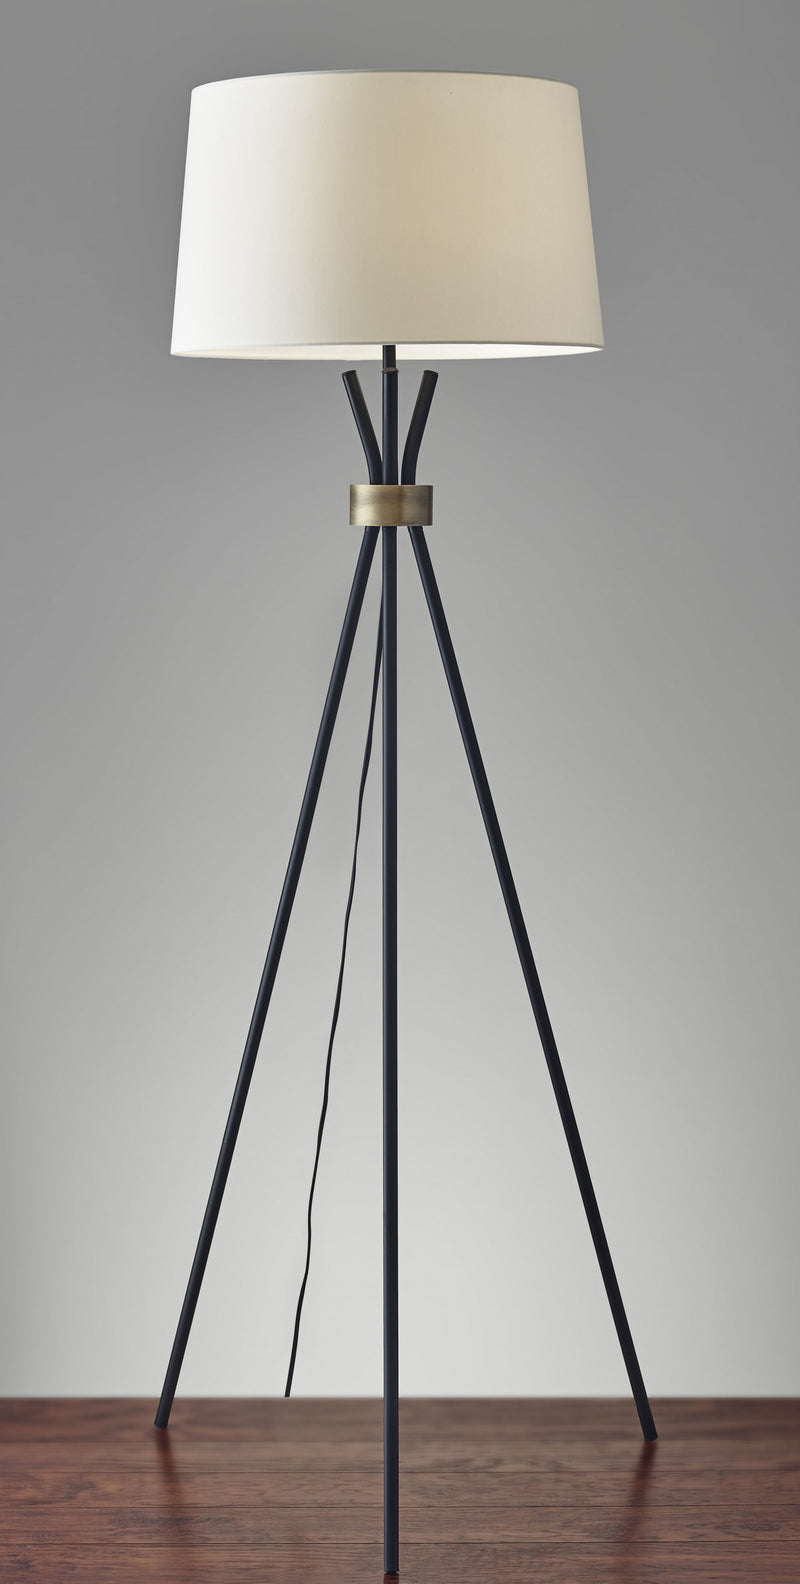 60" Black Tripod Floor Lamp With White Empire Shade